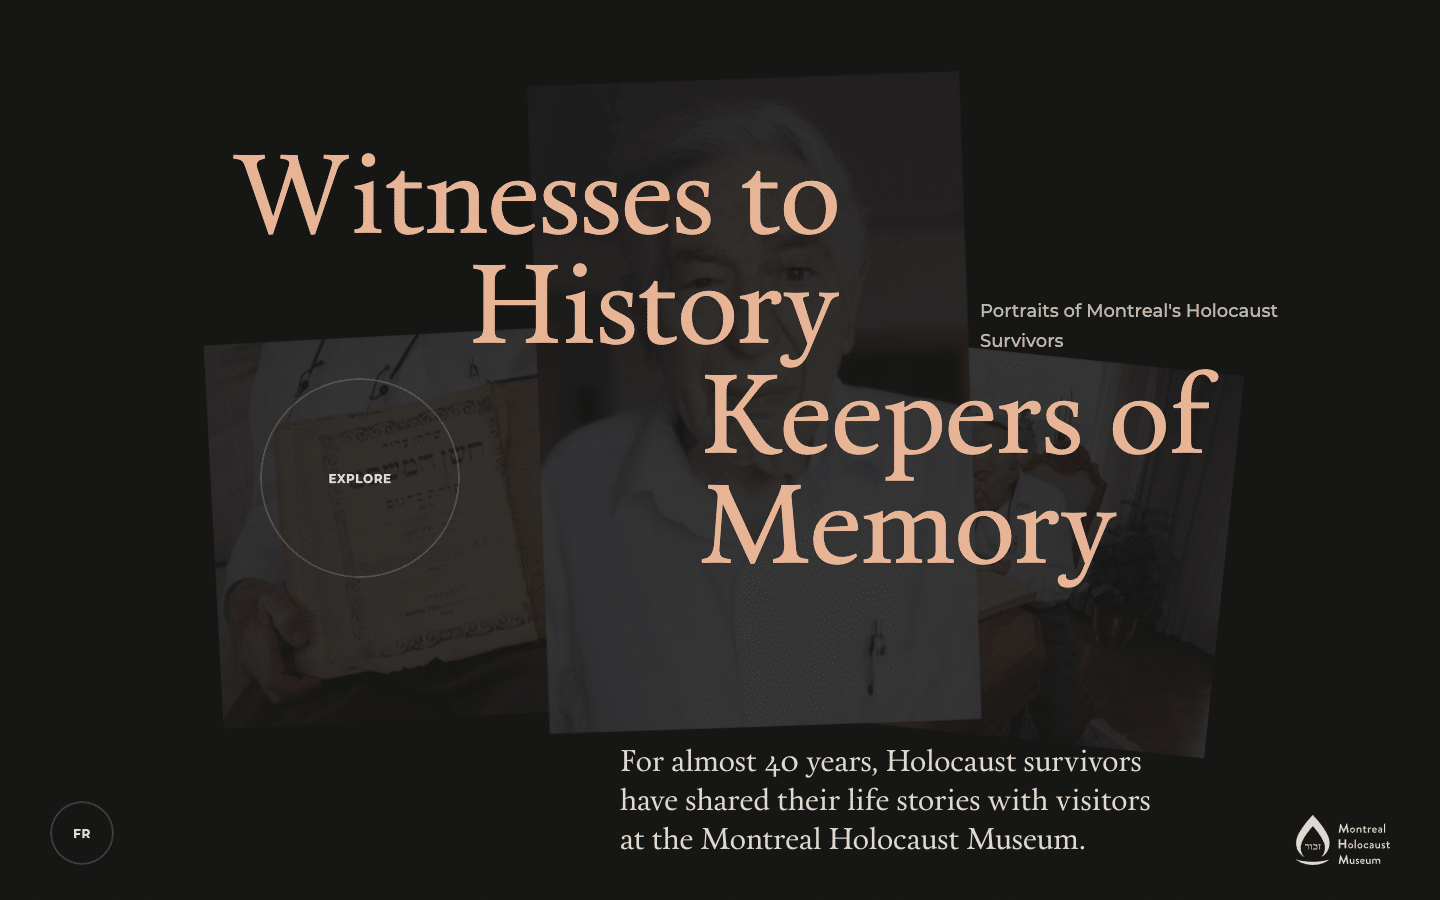 Witnesses to History - Montreal Holocaust Museum